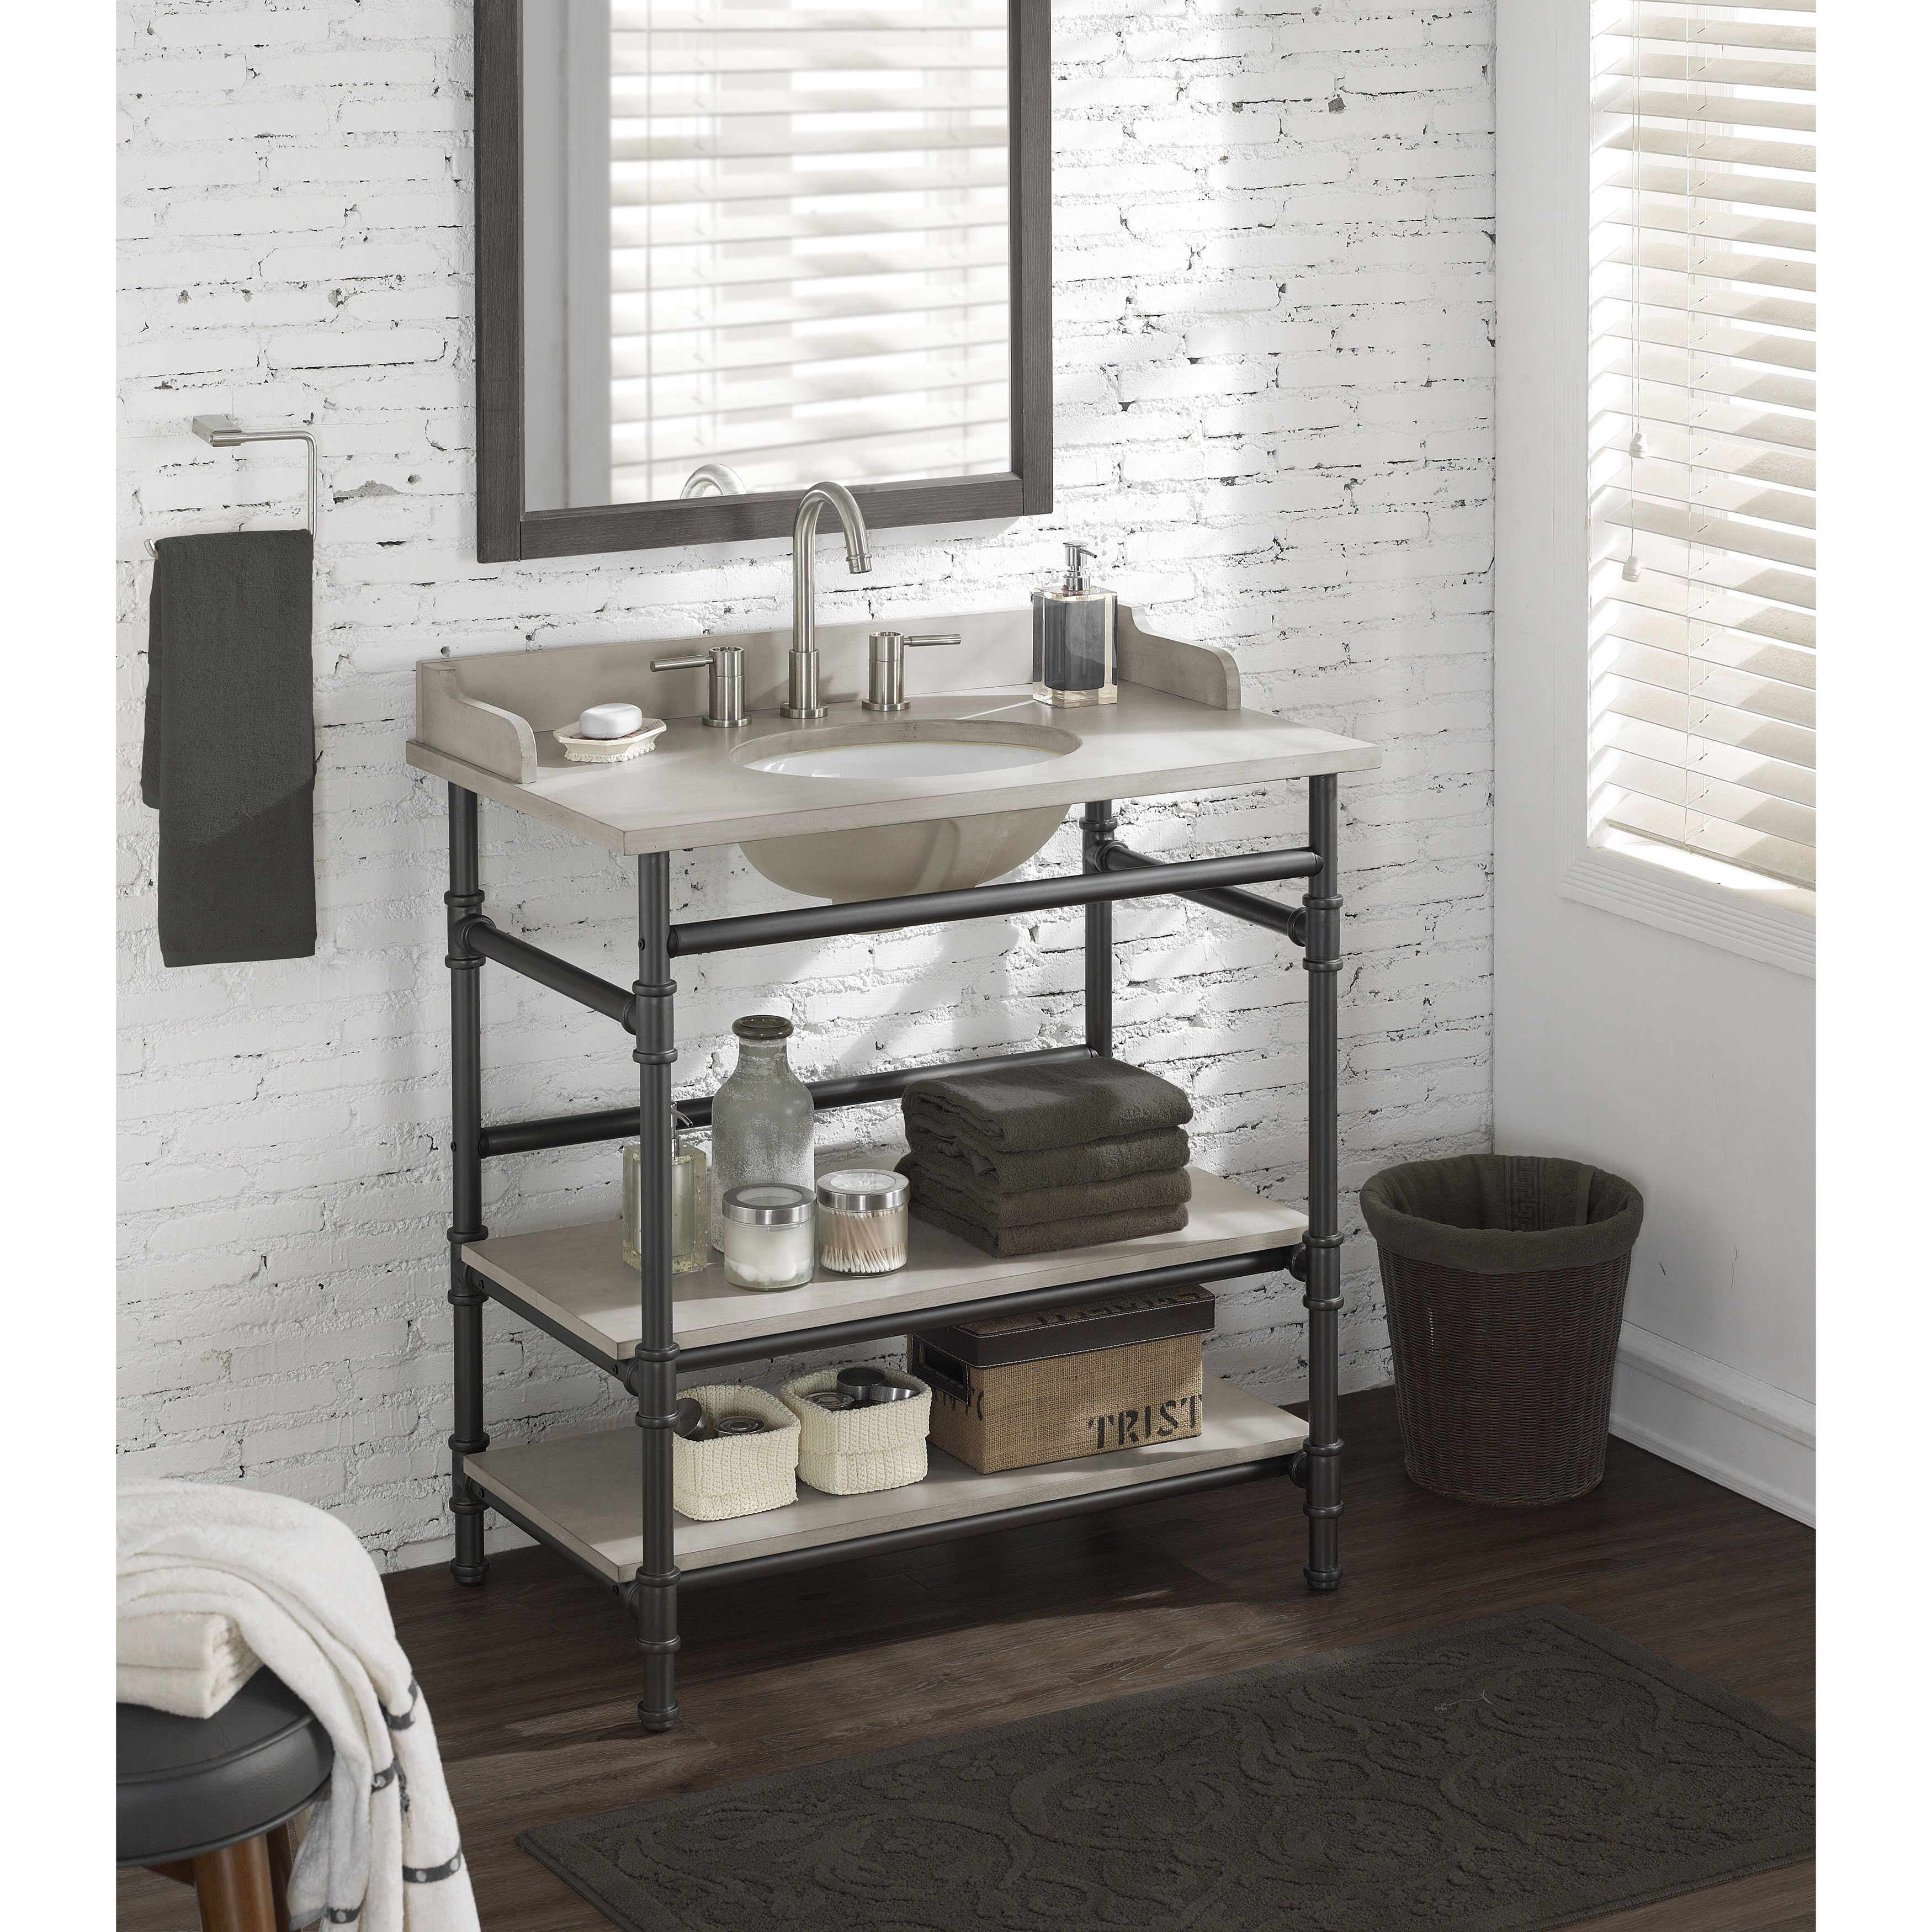 Get The Rustic Look You Love With This Bathroom Vanity With for size 3500 X 3500